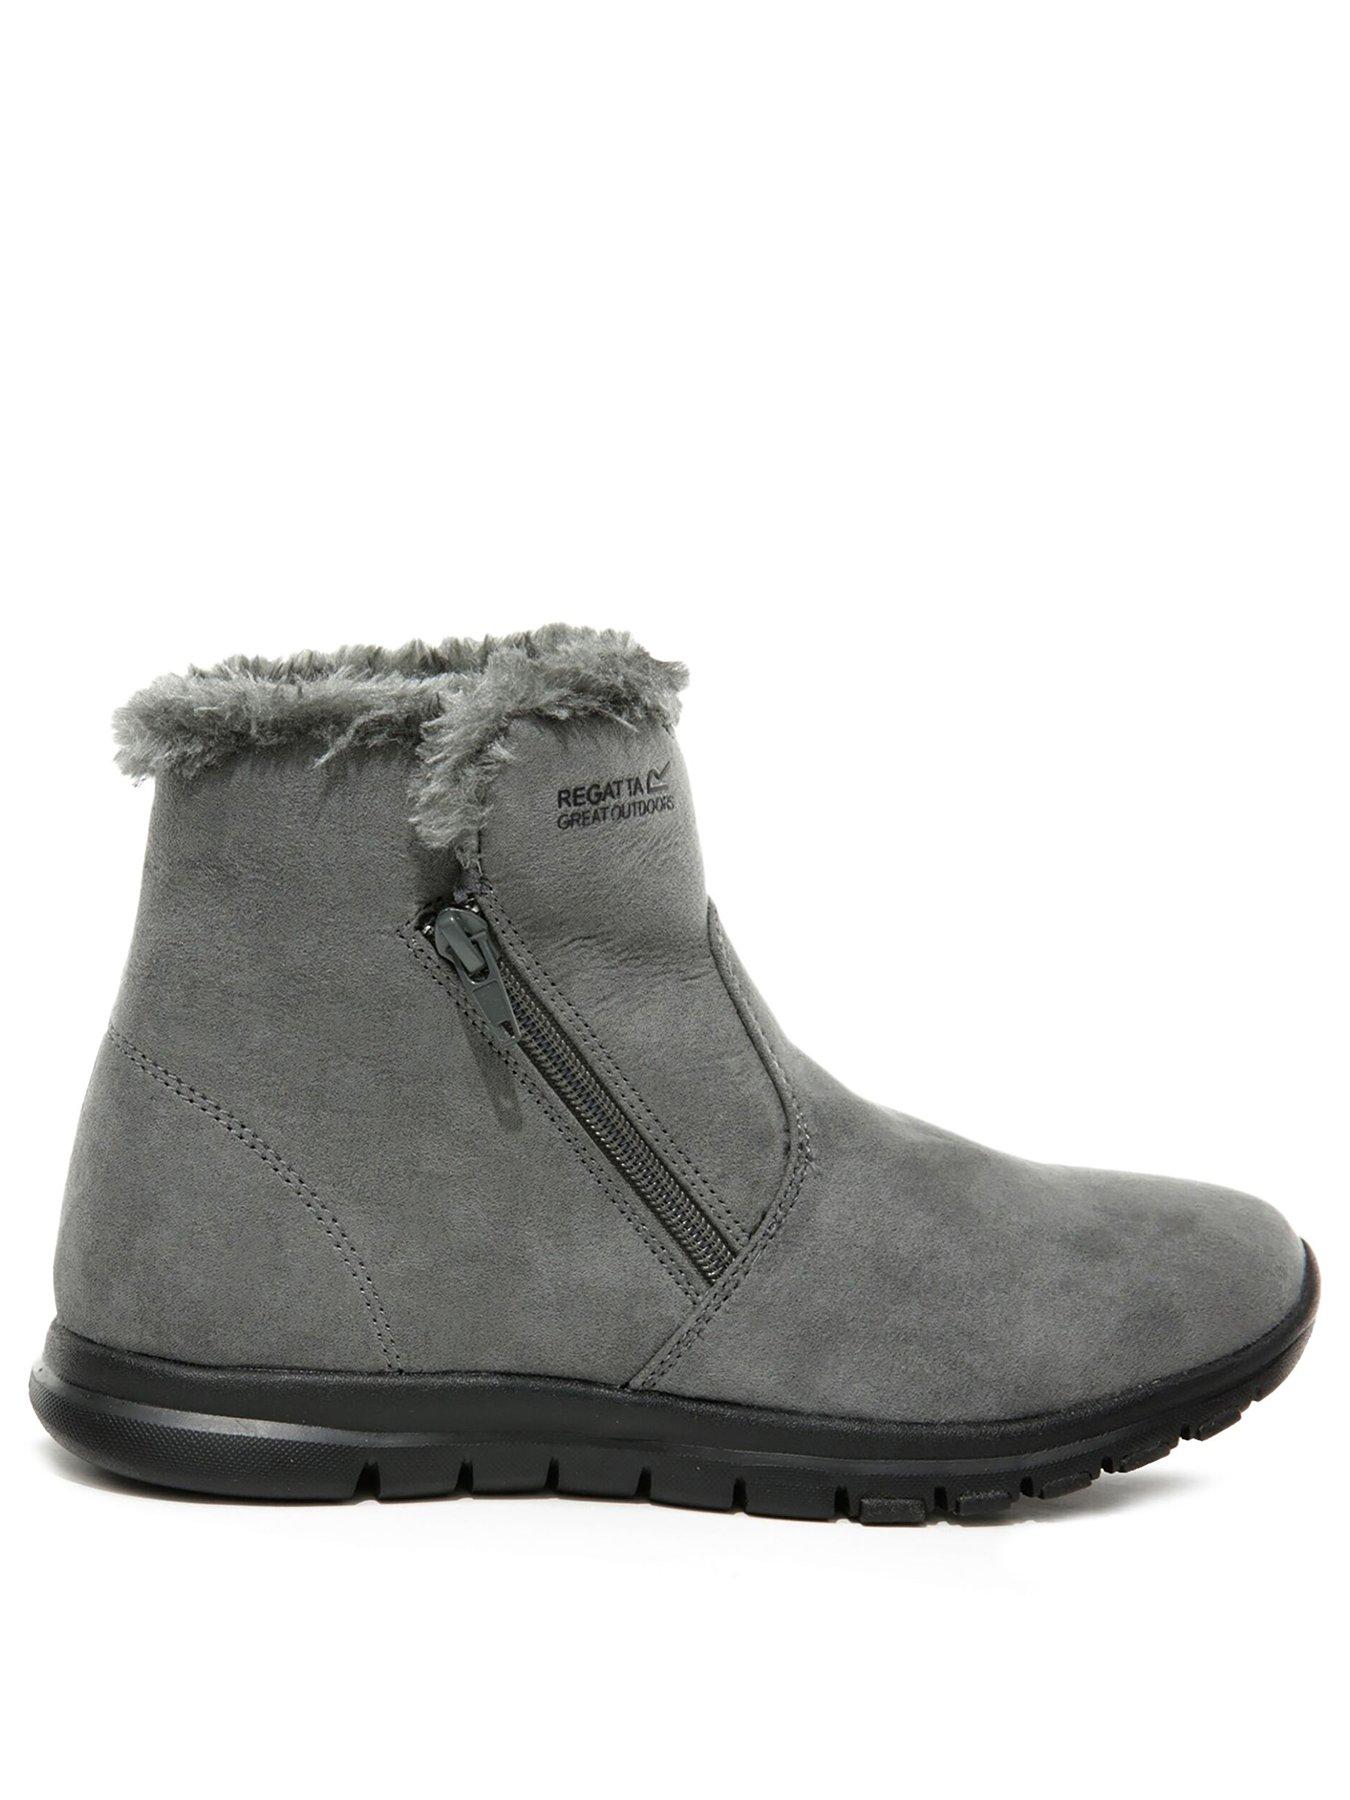 Shoes & boots Verena Boot